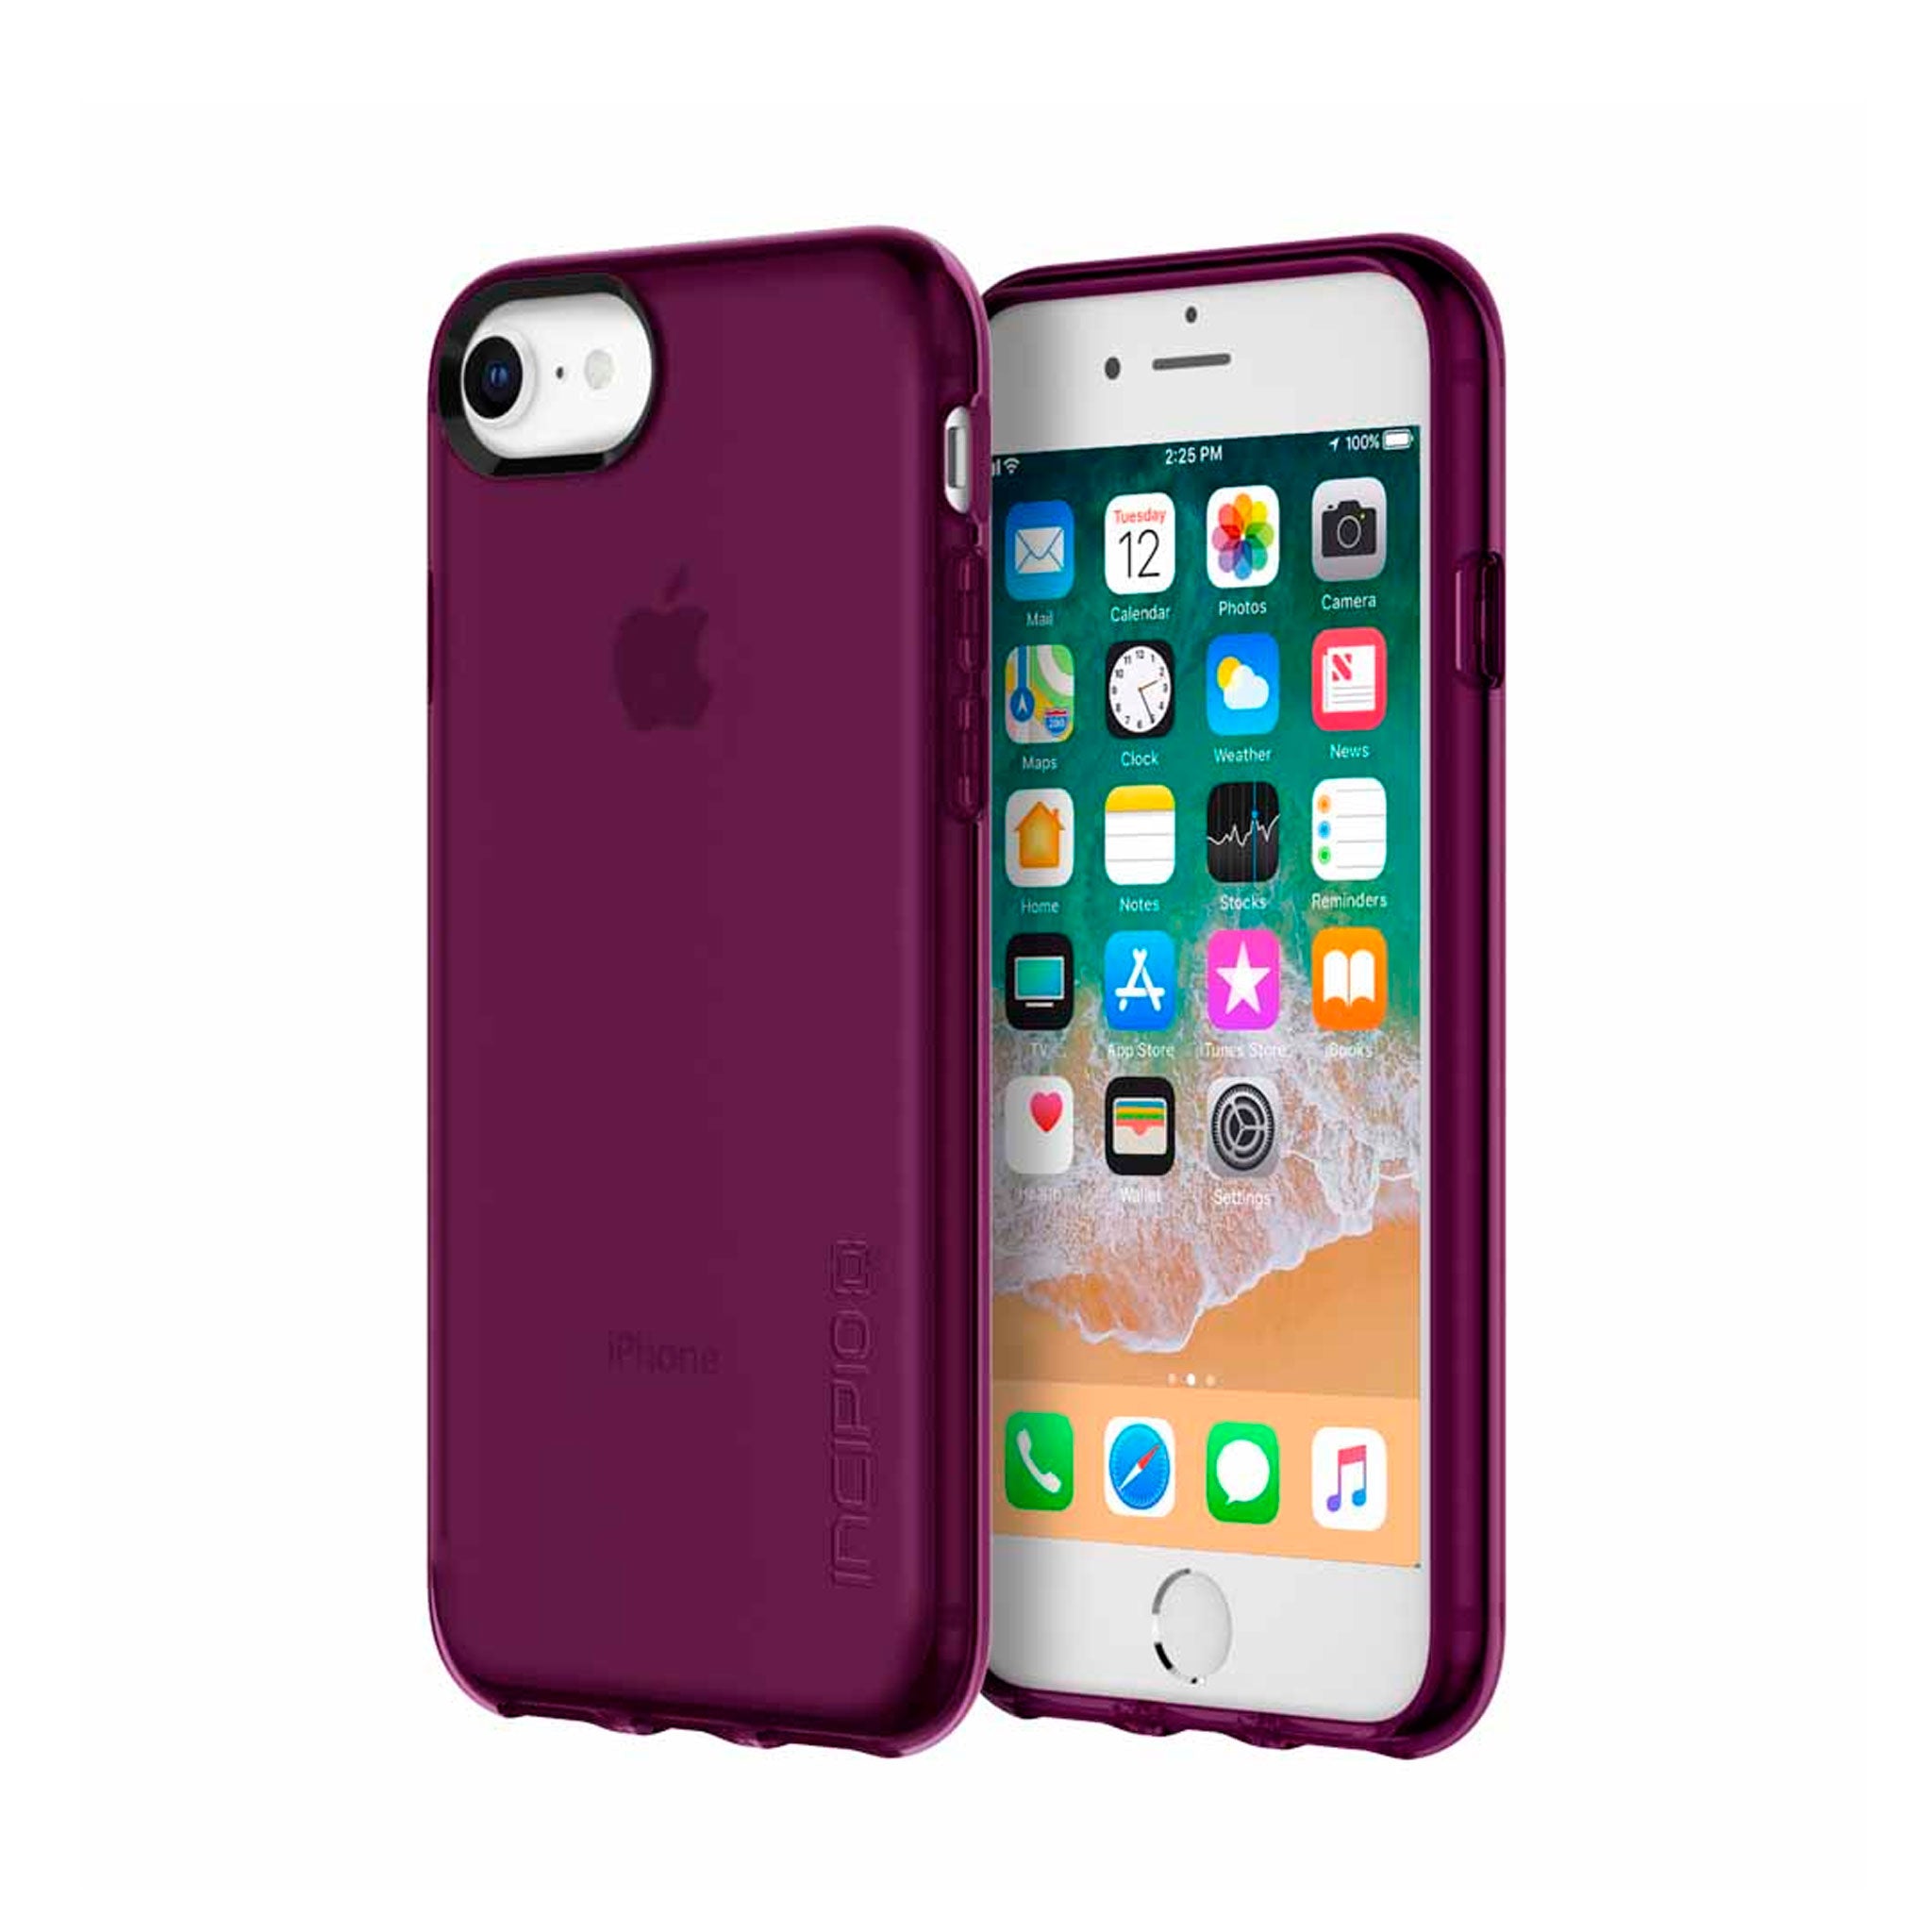 Apple - Incipio Ngp Pure Case for iPhone for 6 / iPhone 6s / iPhone 7 / iPhone 8 - Plum